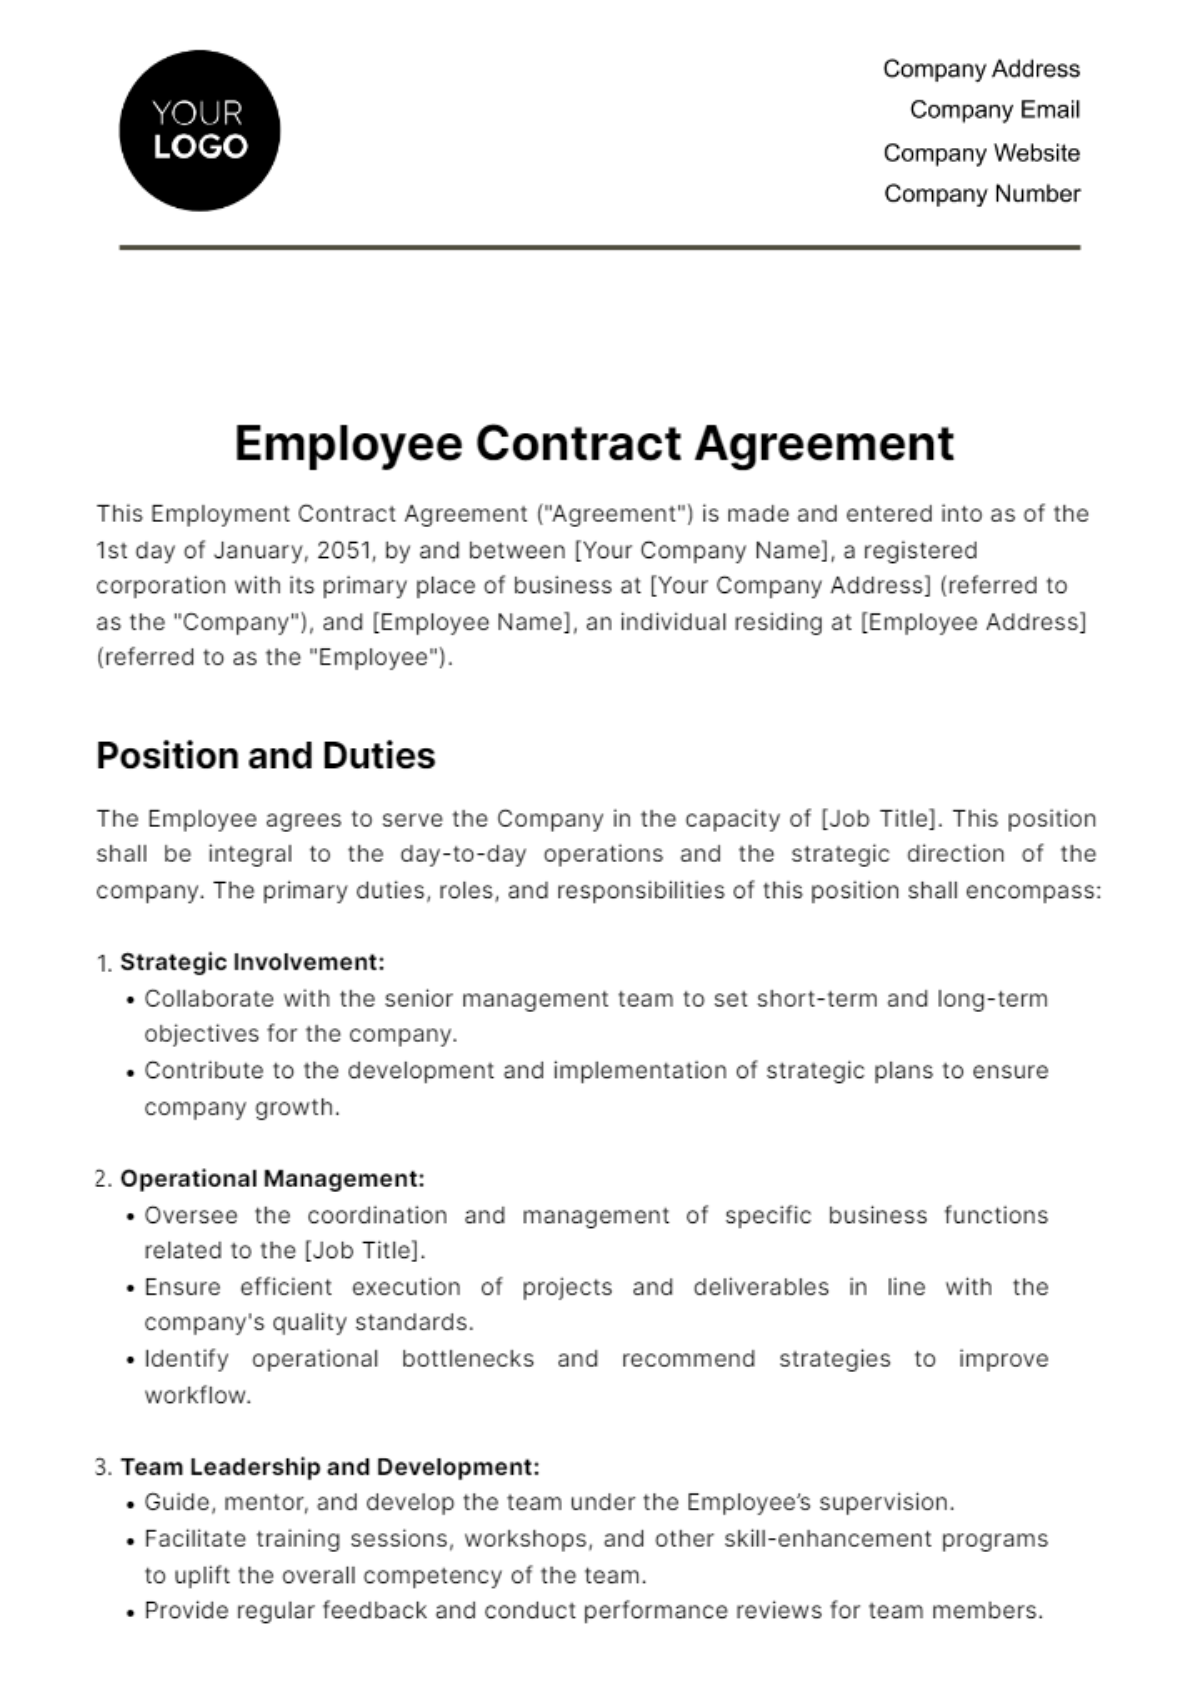 Free Employee Contract Agreement HR Template